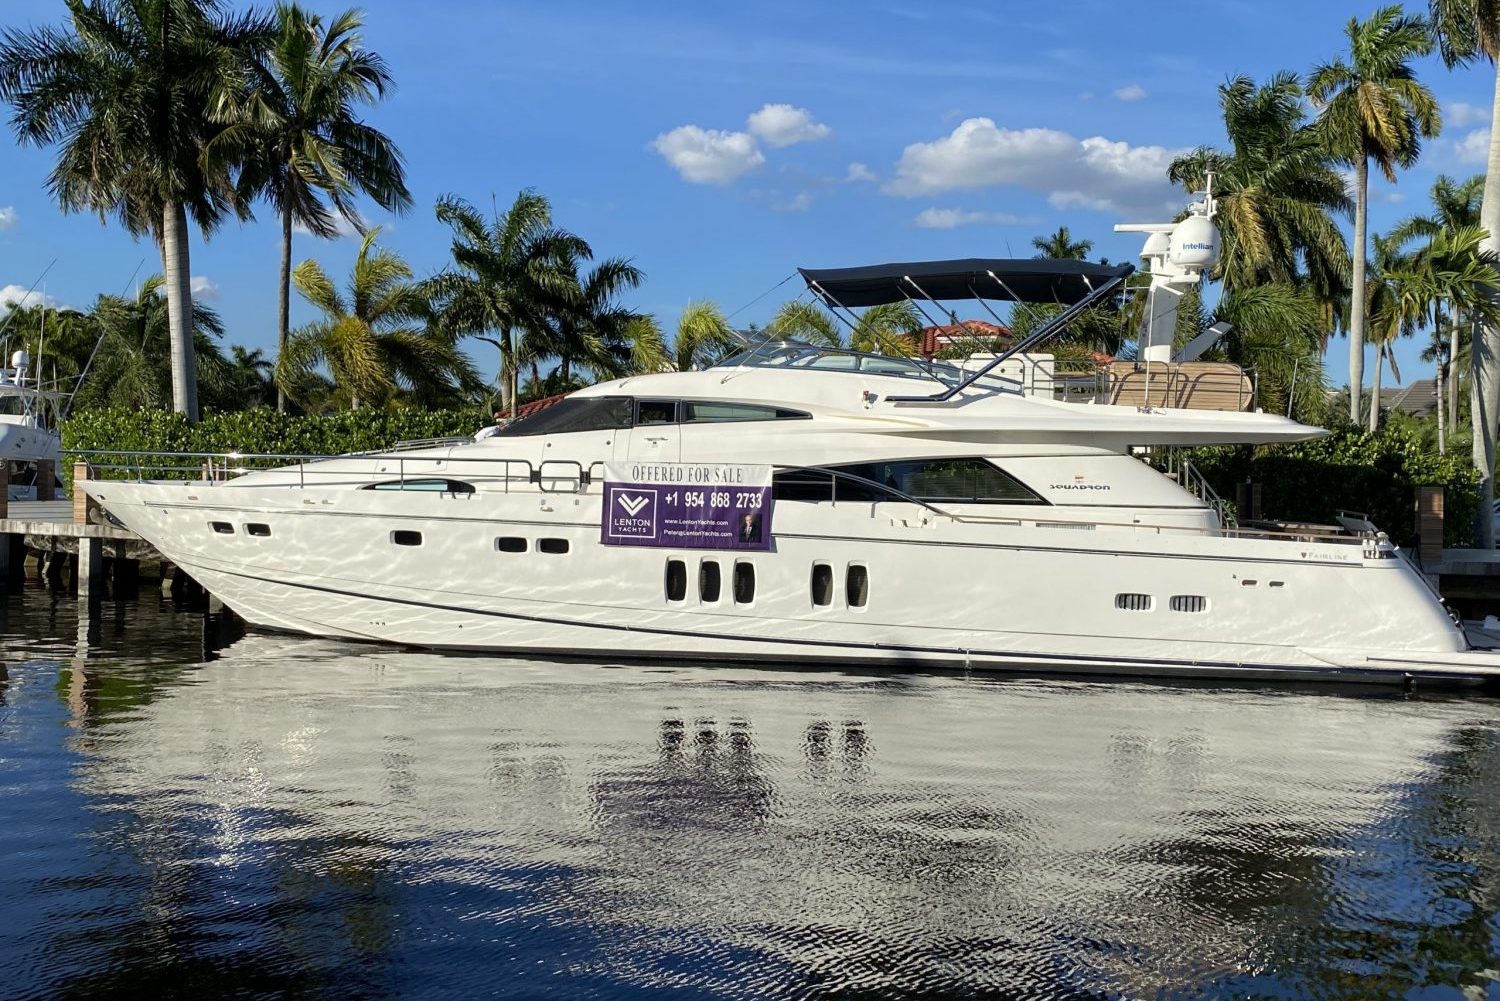 docked yacht branded with lenton yachts sales collateral